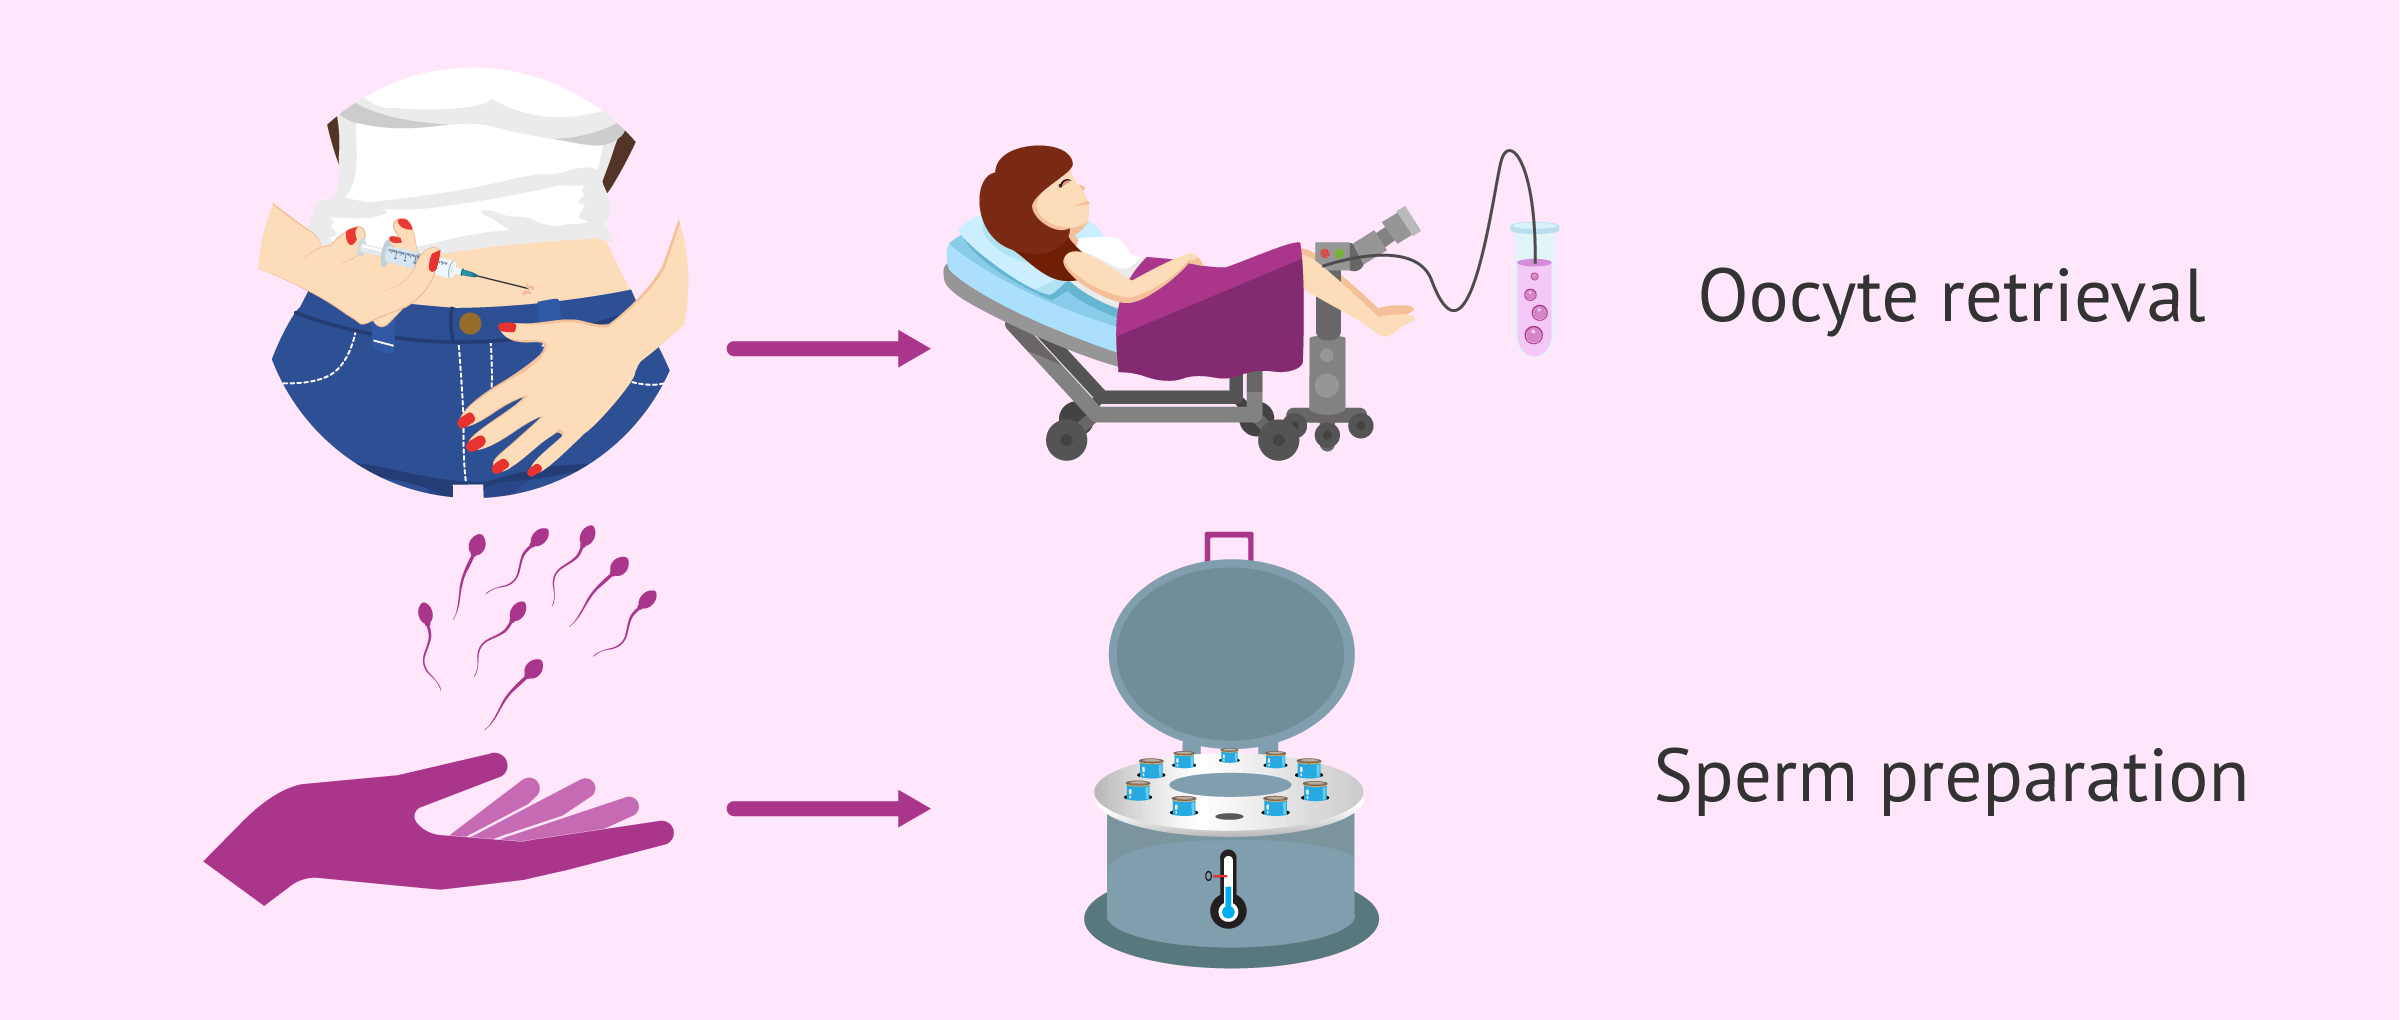 Process of IVF with donor sperm